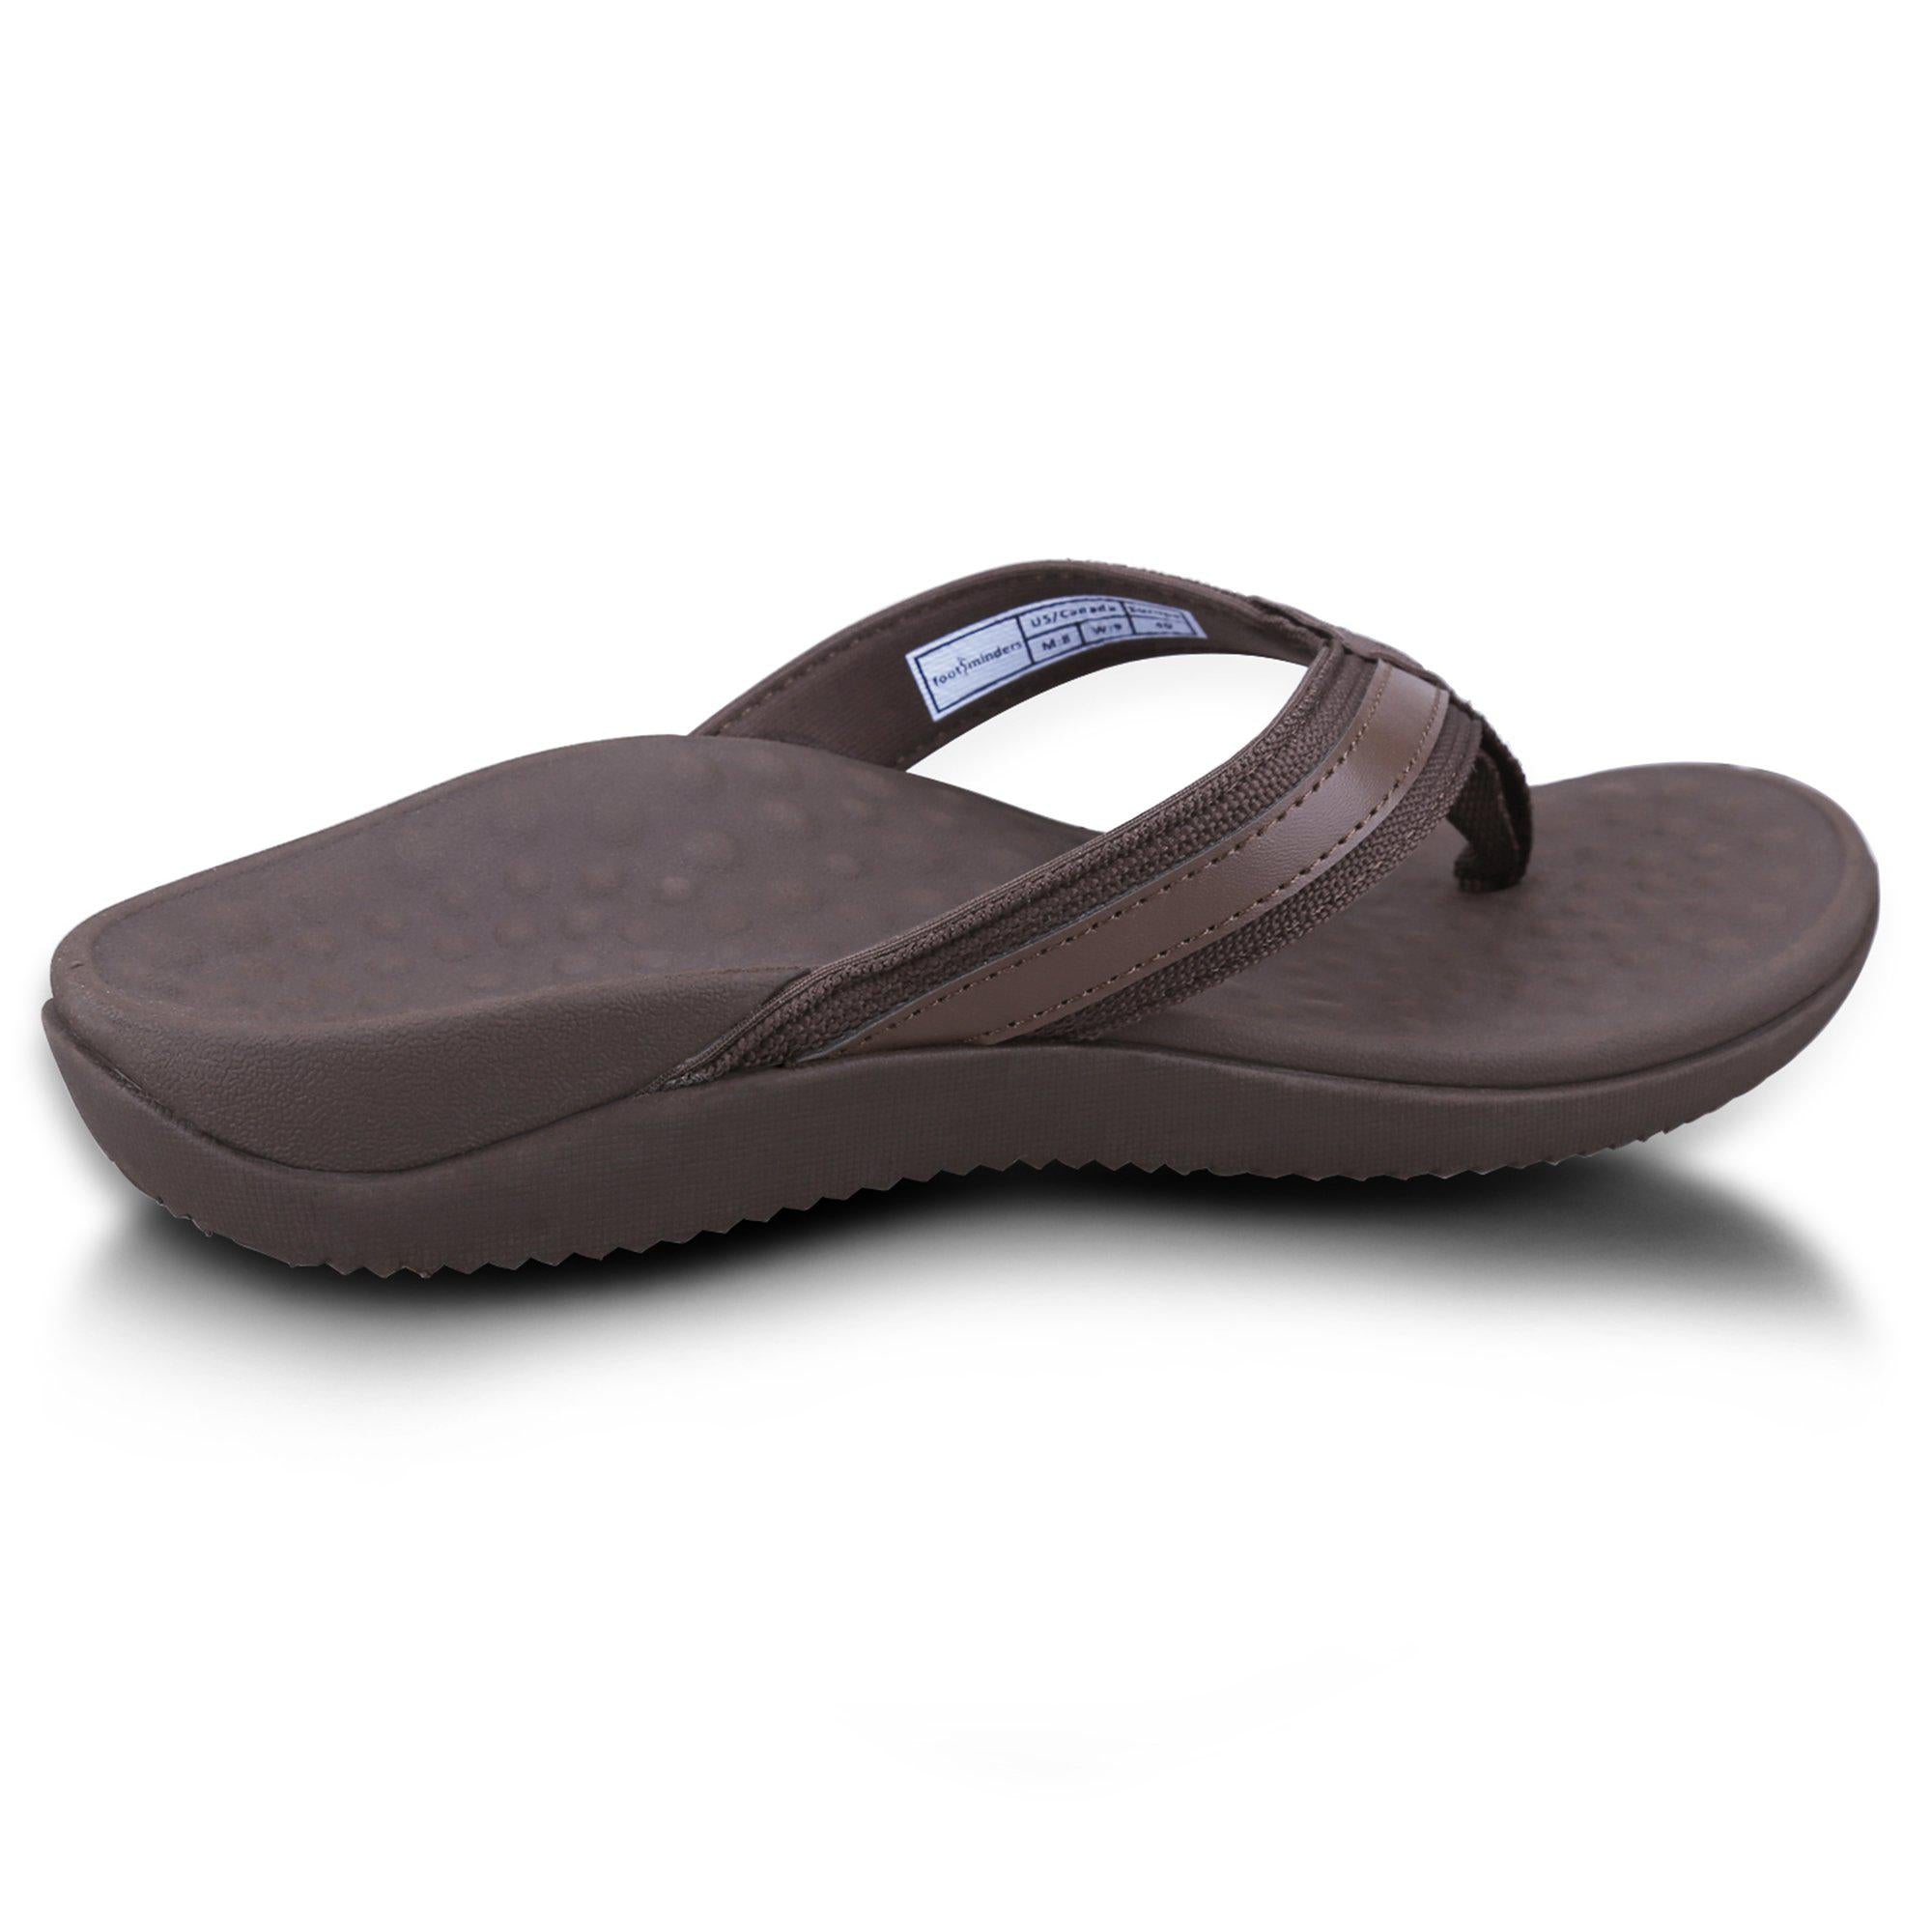 arch support sandal